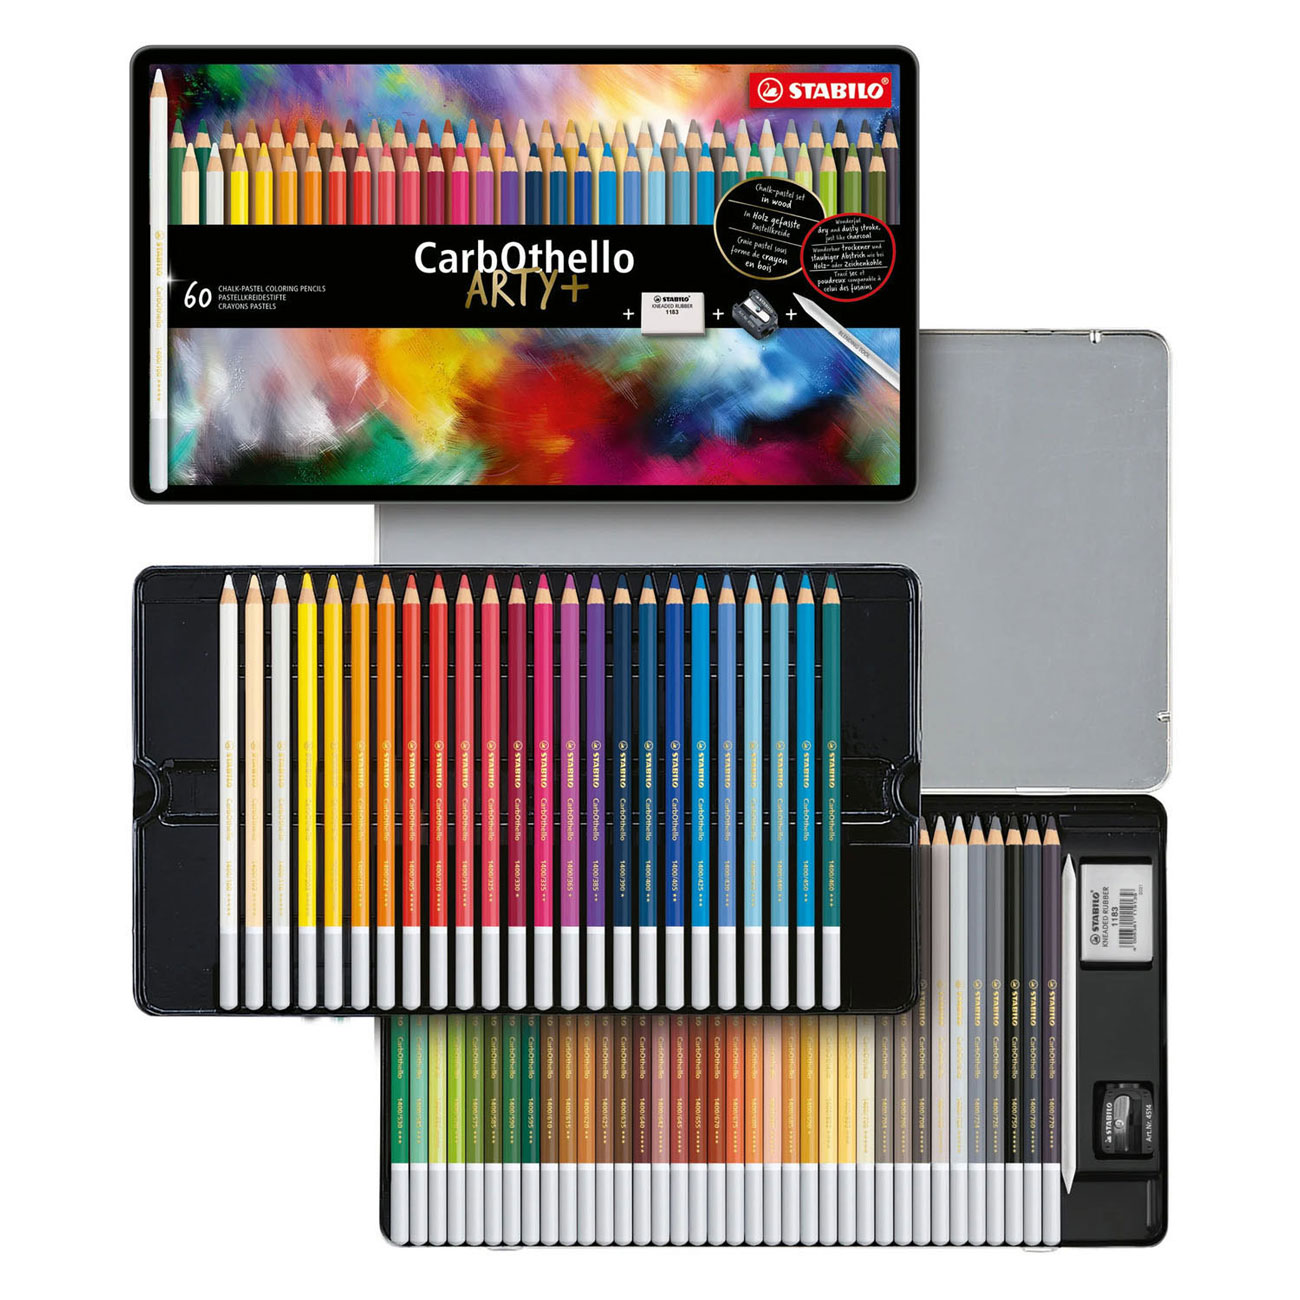 Chalk-pastel pencil STABILO CarbOthello - metal box with 60 colors